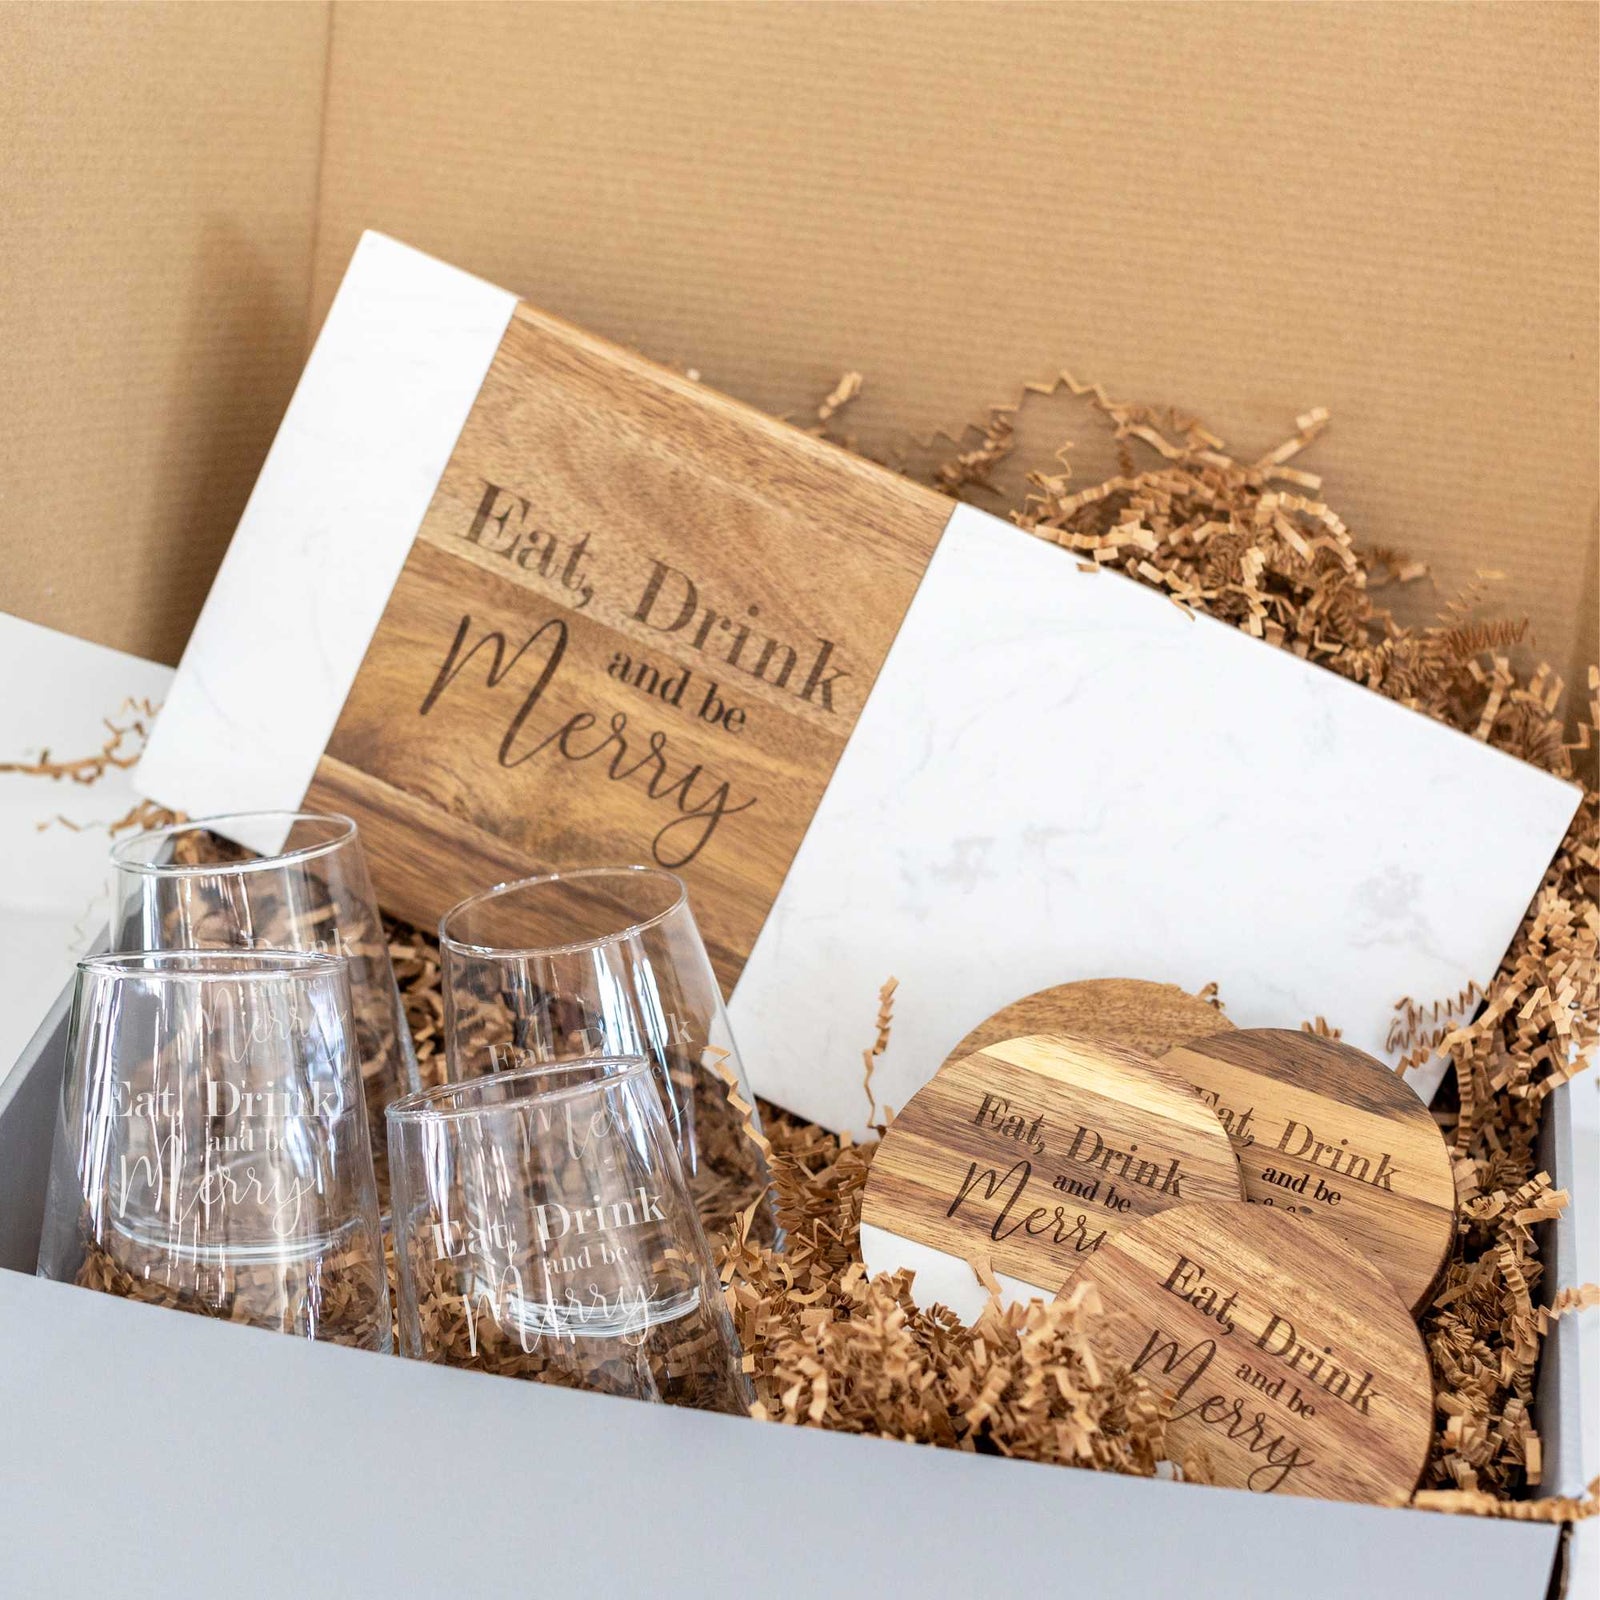 Eat, Drink, and be Merry - 9pc Gift Set